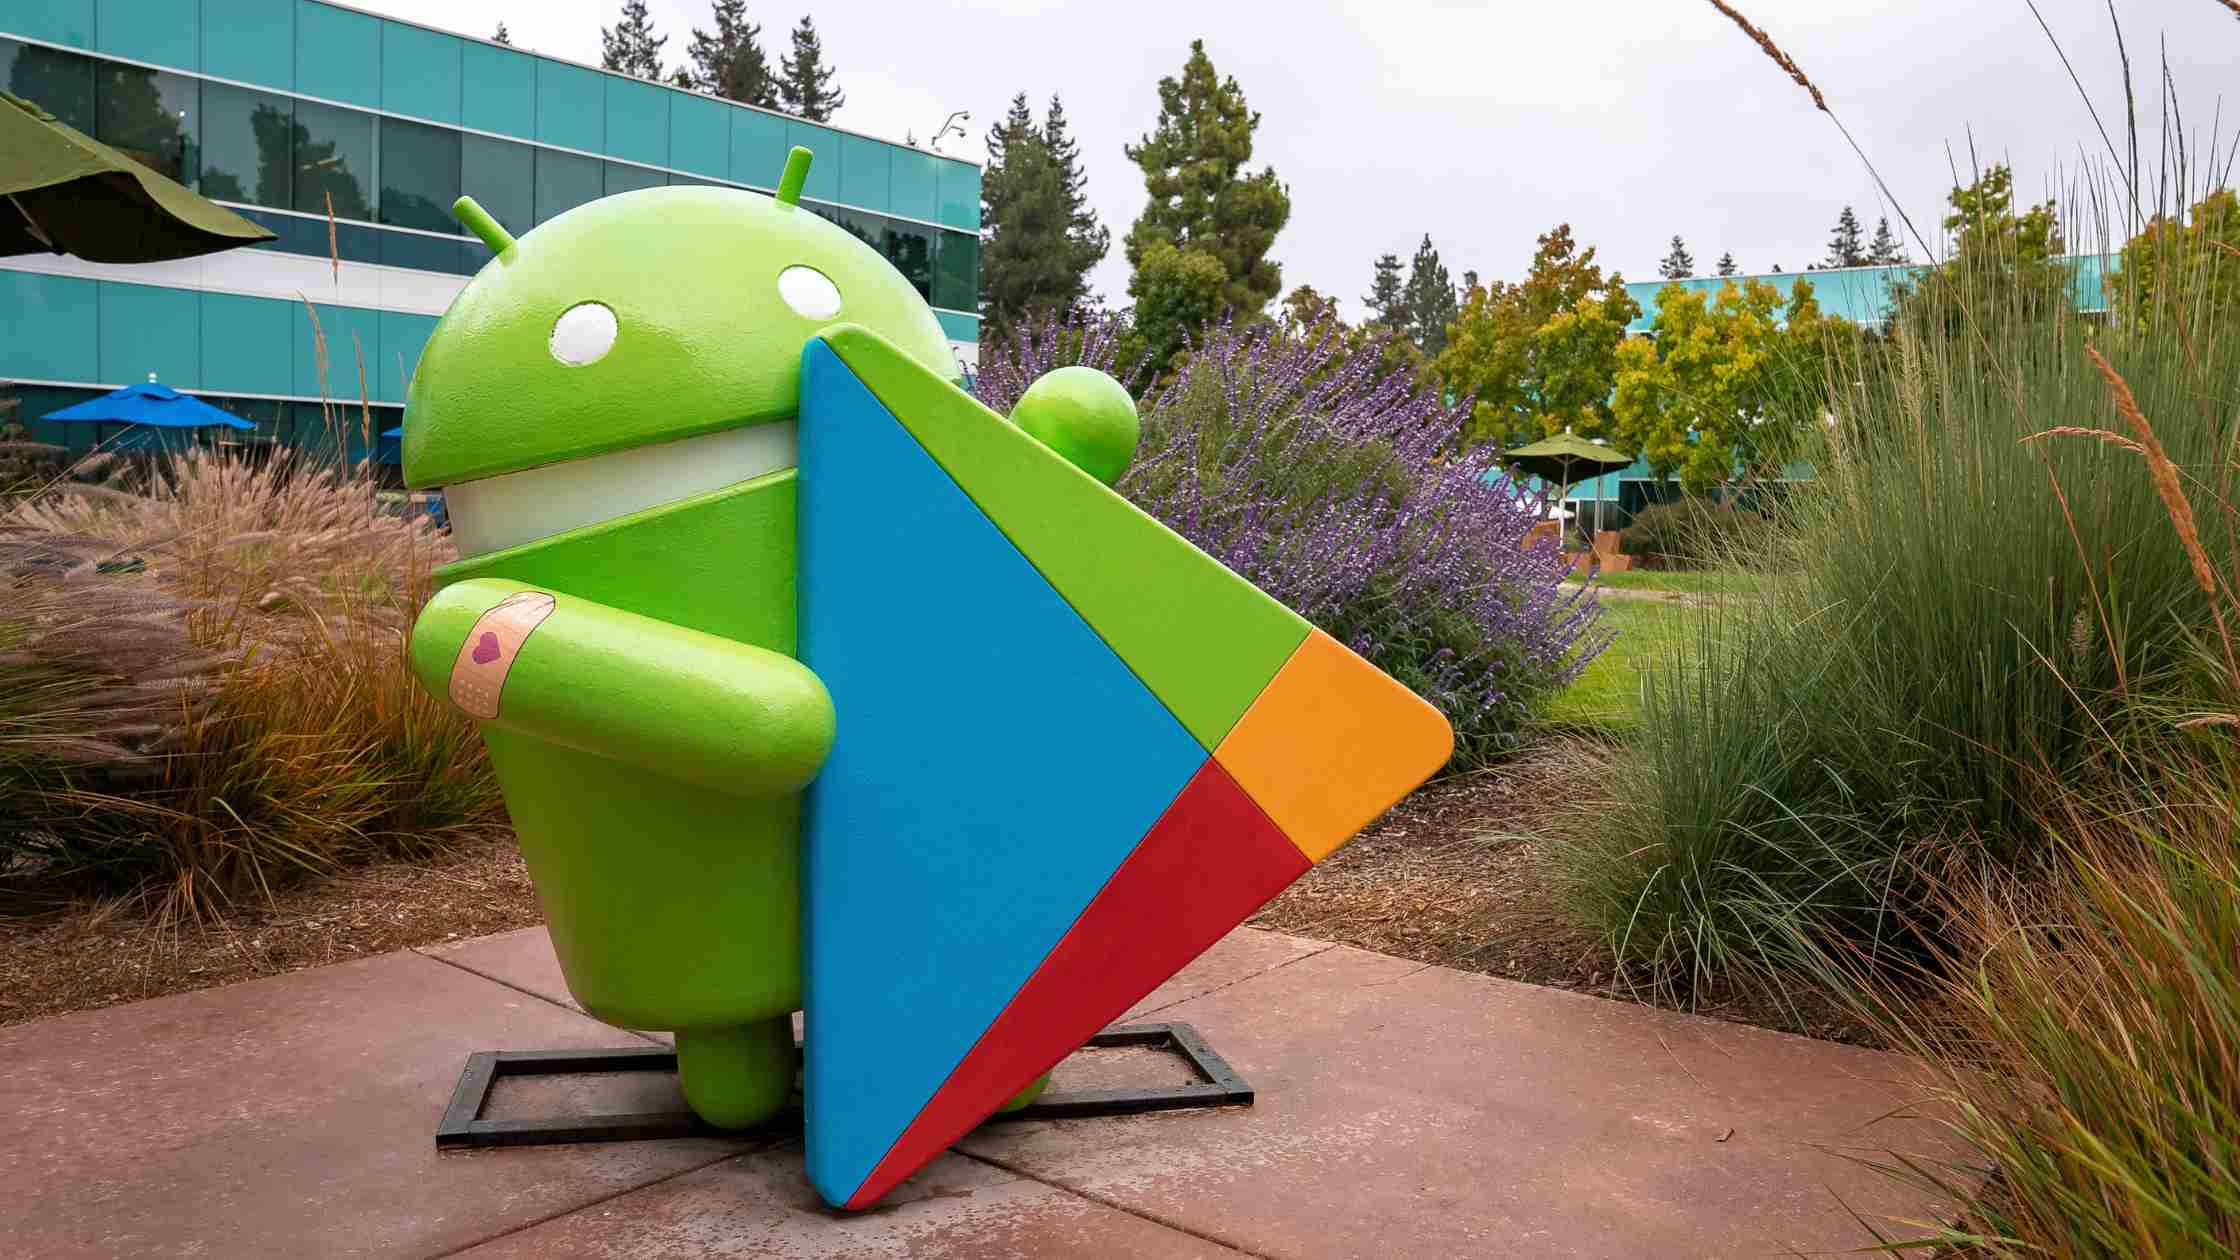 Statue of Android guy with PlayStore logo in grounds outside Google campus